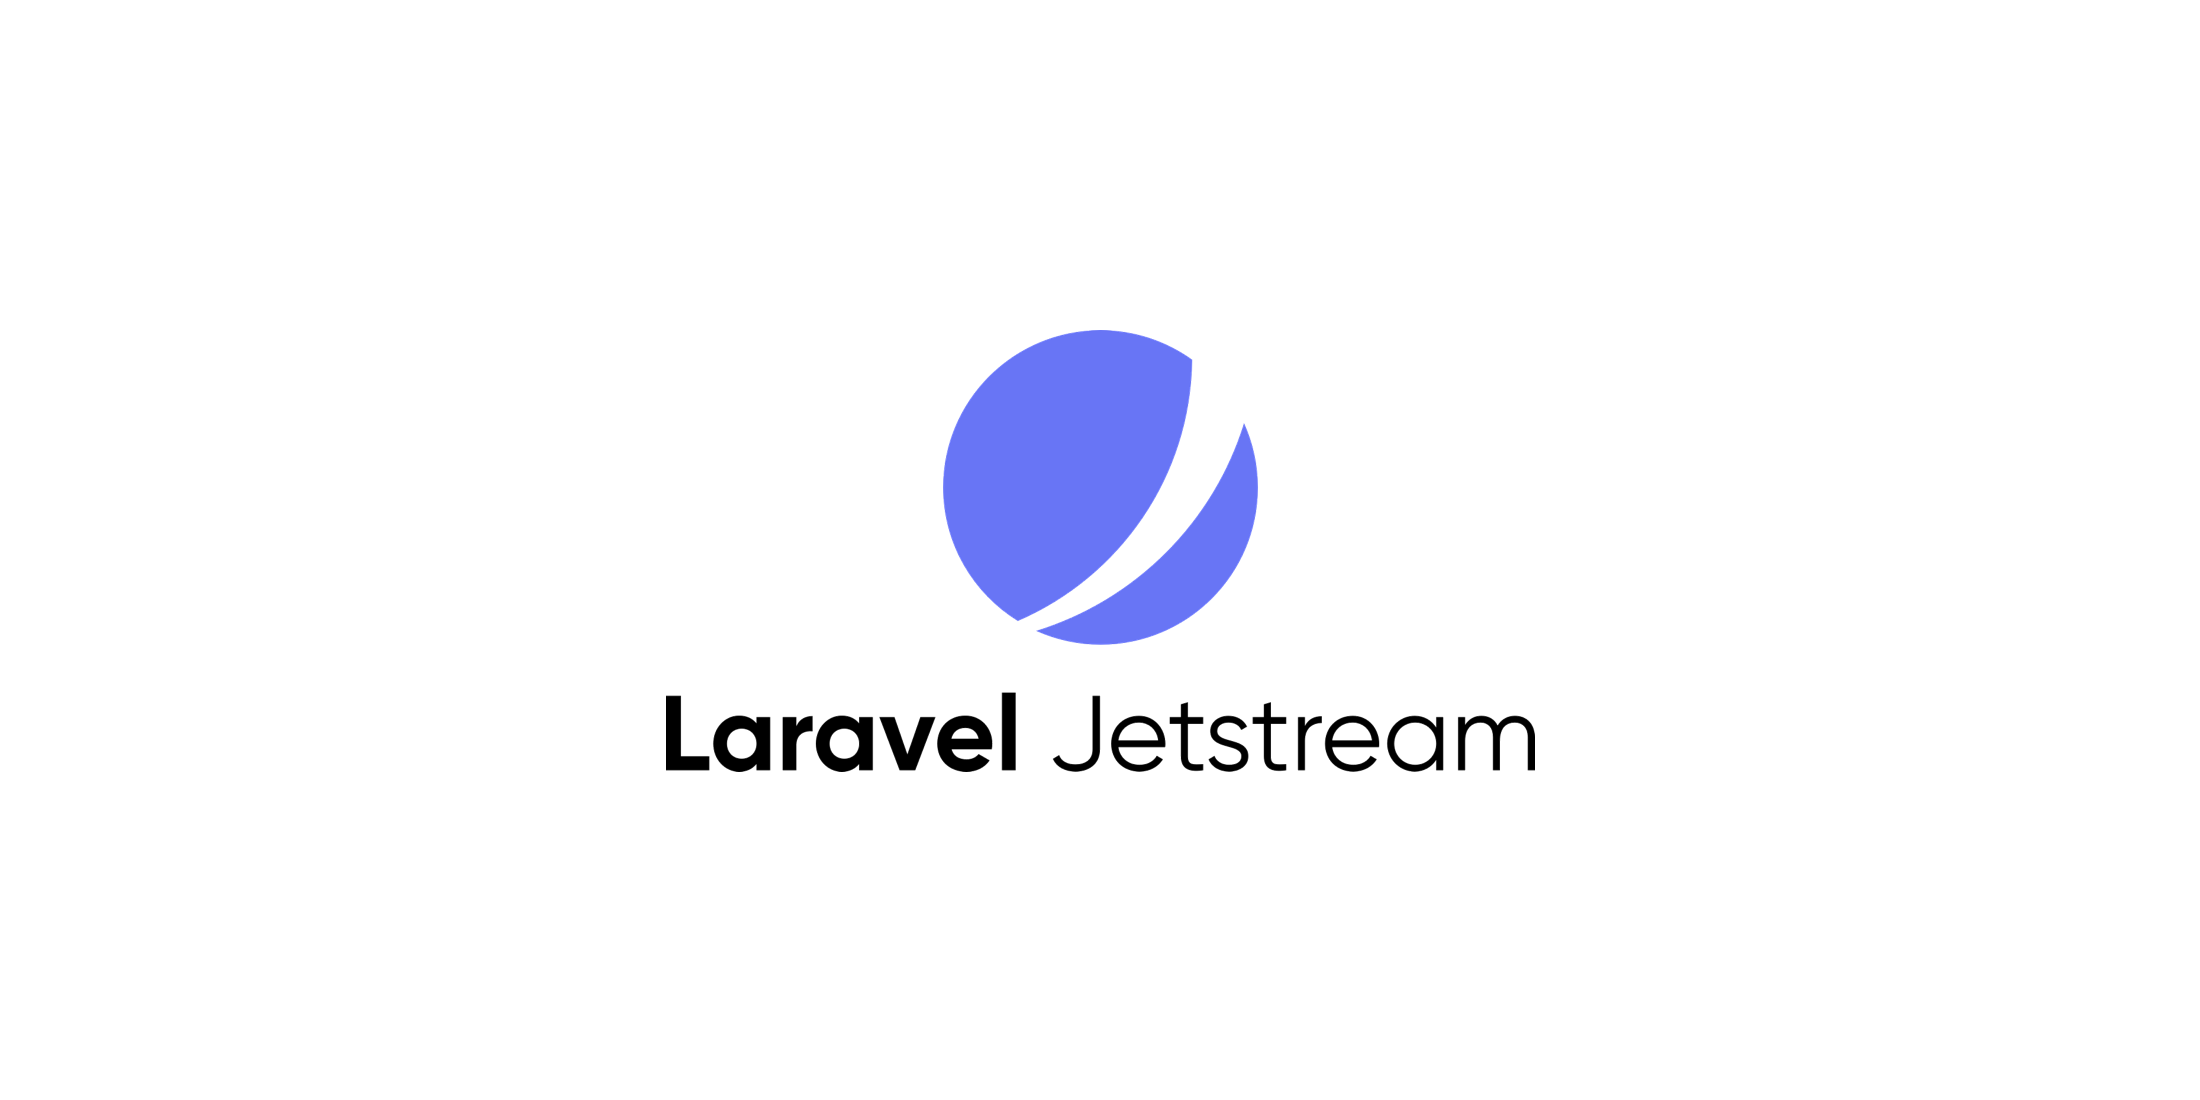 How to override login redirects in Jetstream or Fortify image